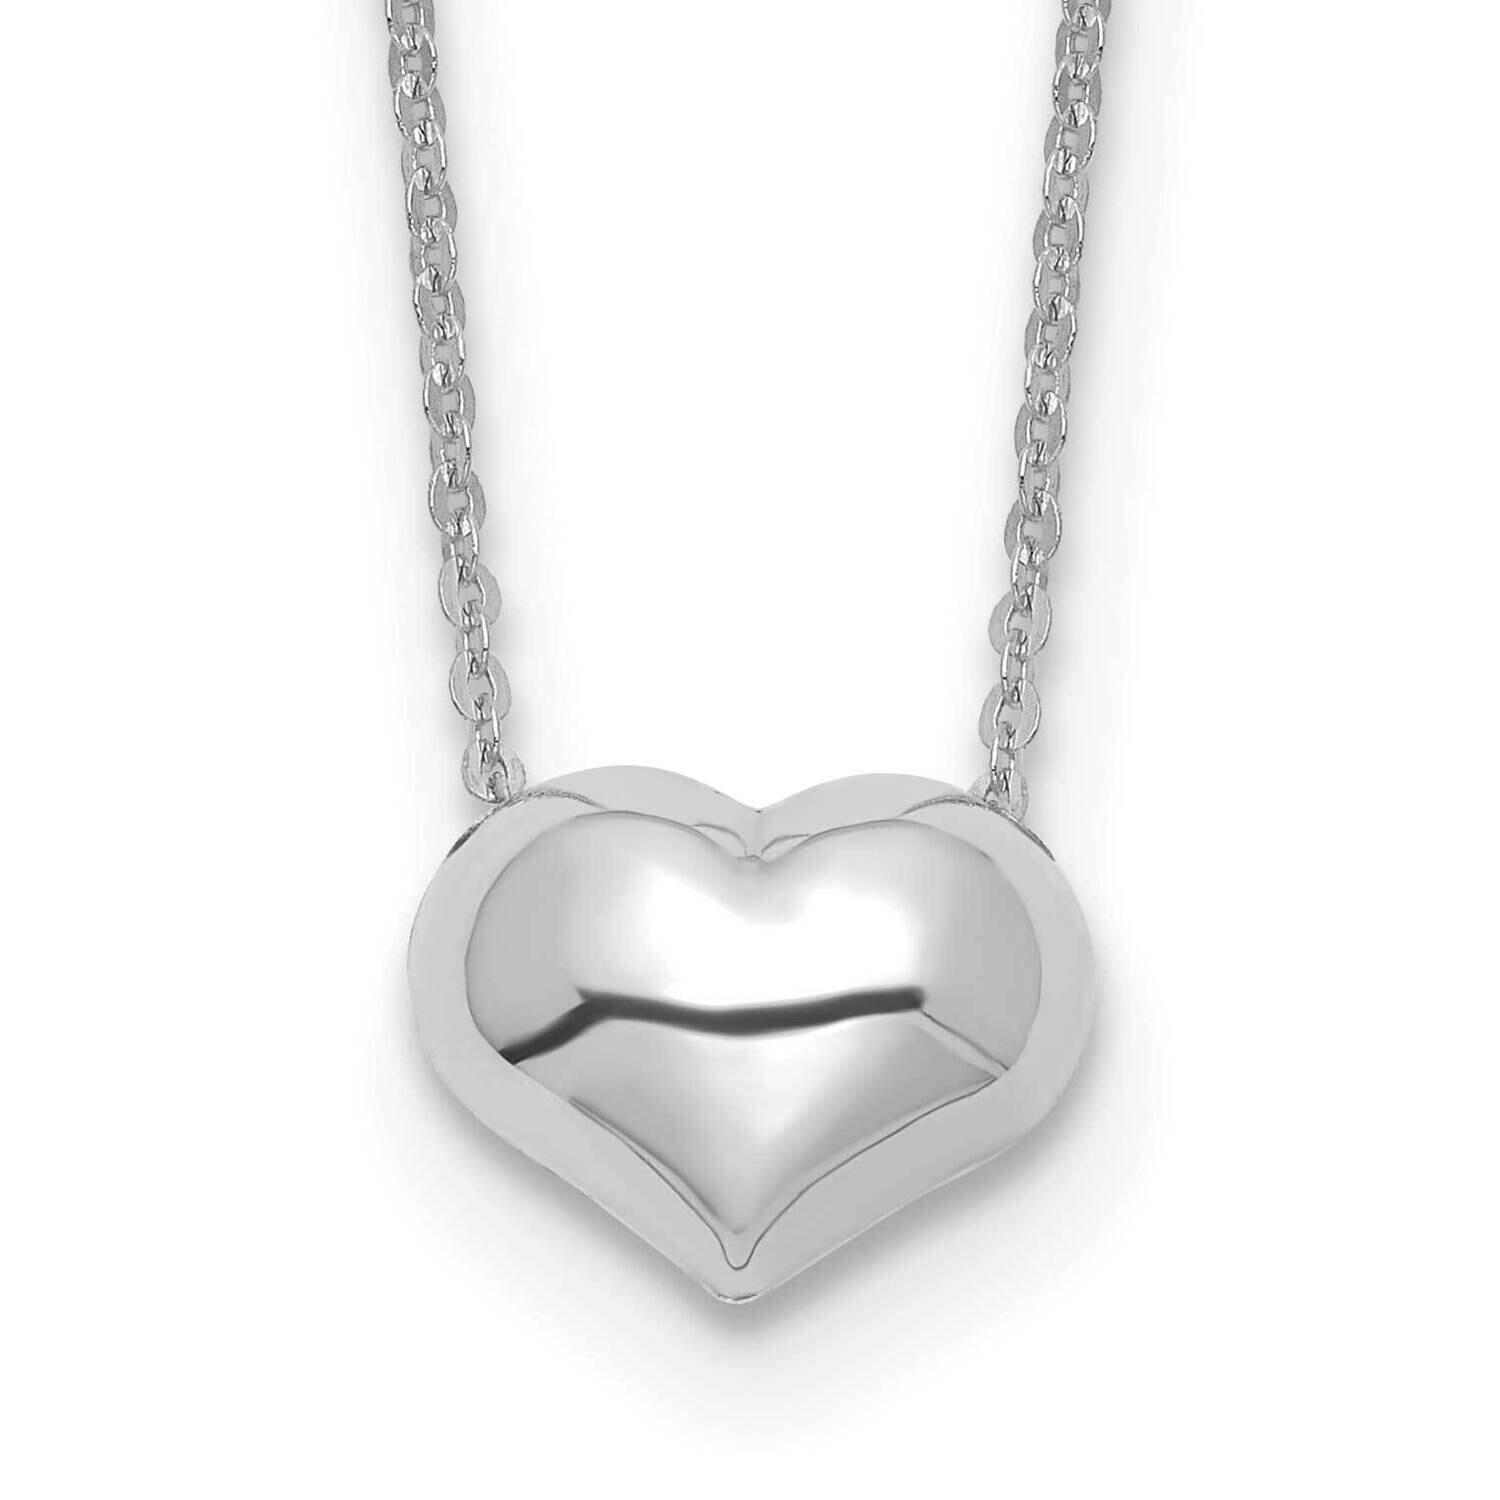 Polished Puffed Heart 16.5 Inch Necklace 14k White Gold SF2871W-16.5